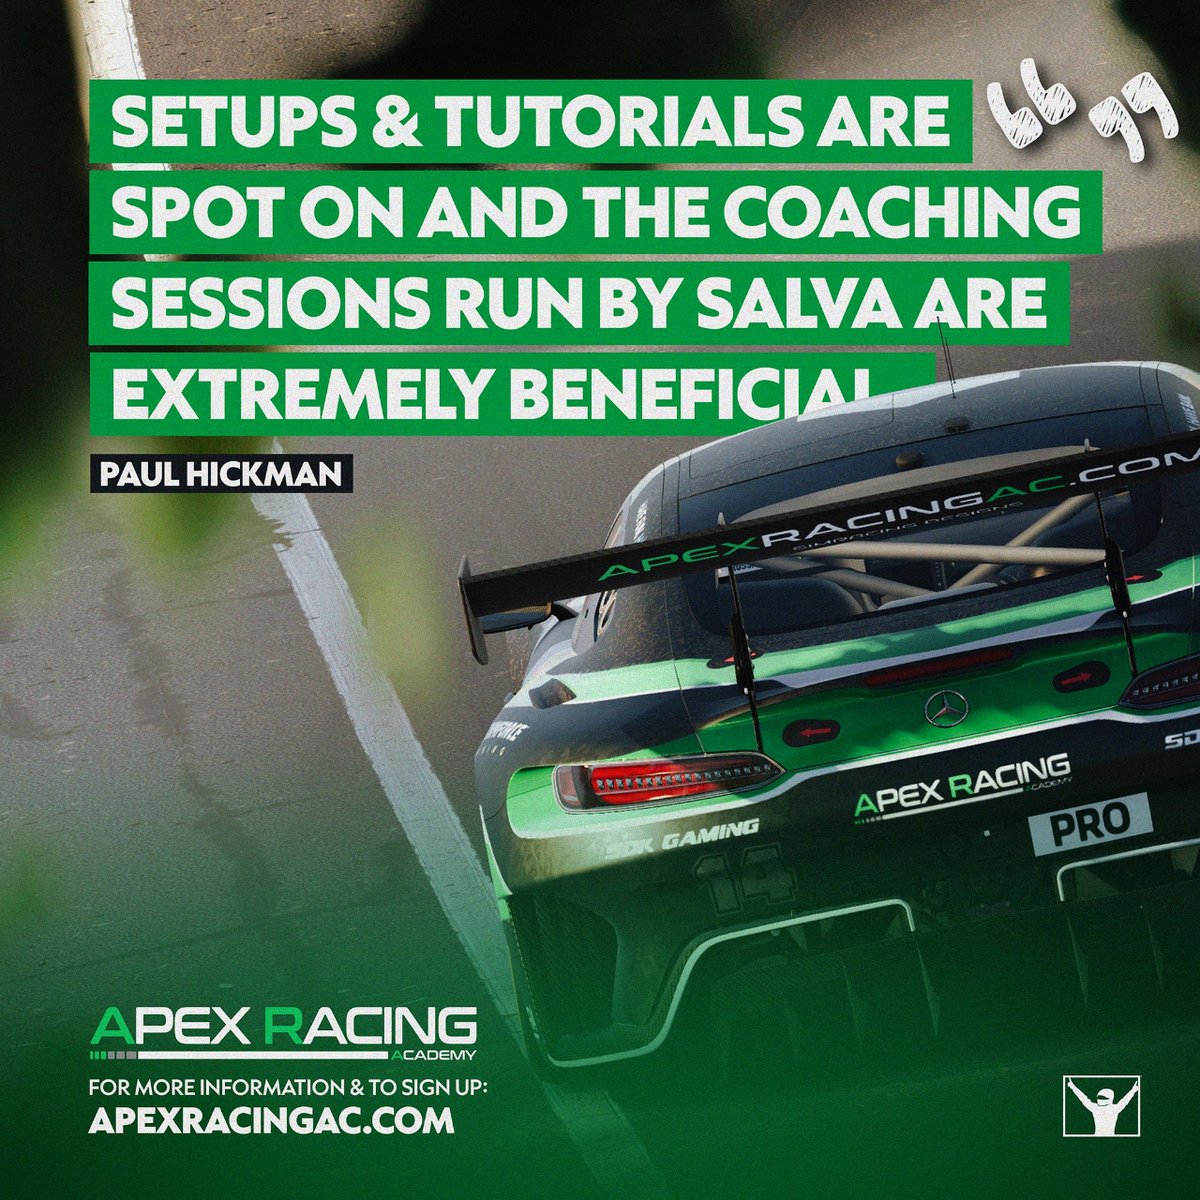 Appreciate the kind words for our coaches! 💪 Want to get involved in our group coaching sessions for this week? Head over to our discord for more information:  🔗 discord.gg/JQjbsbS #apexracingacademy #iracing